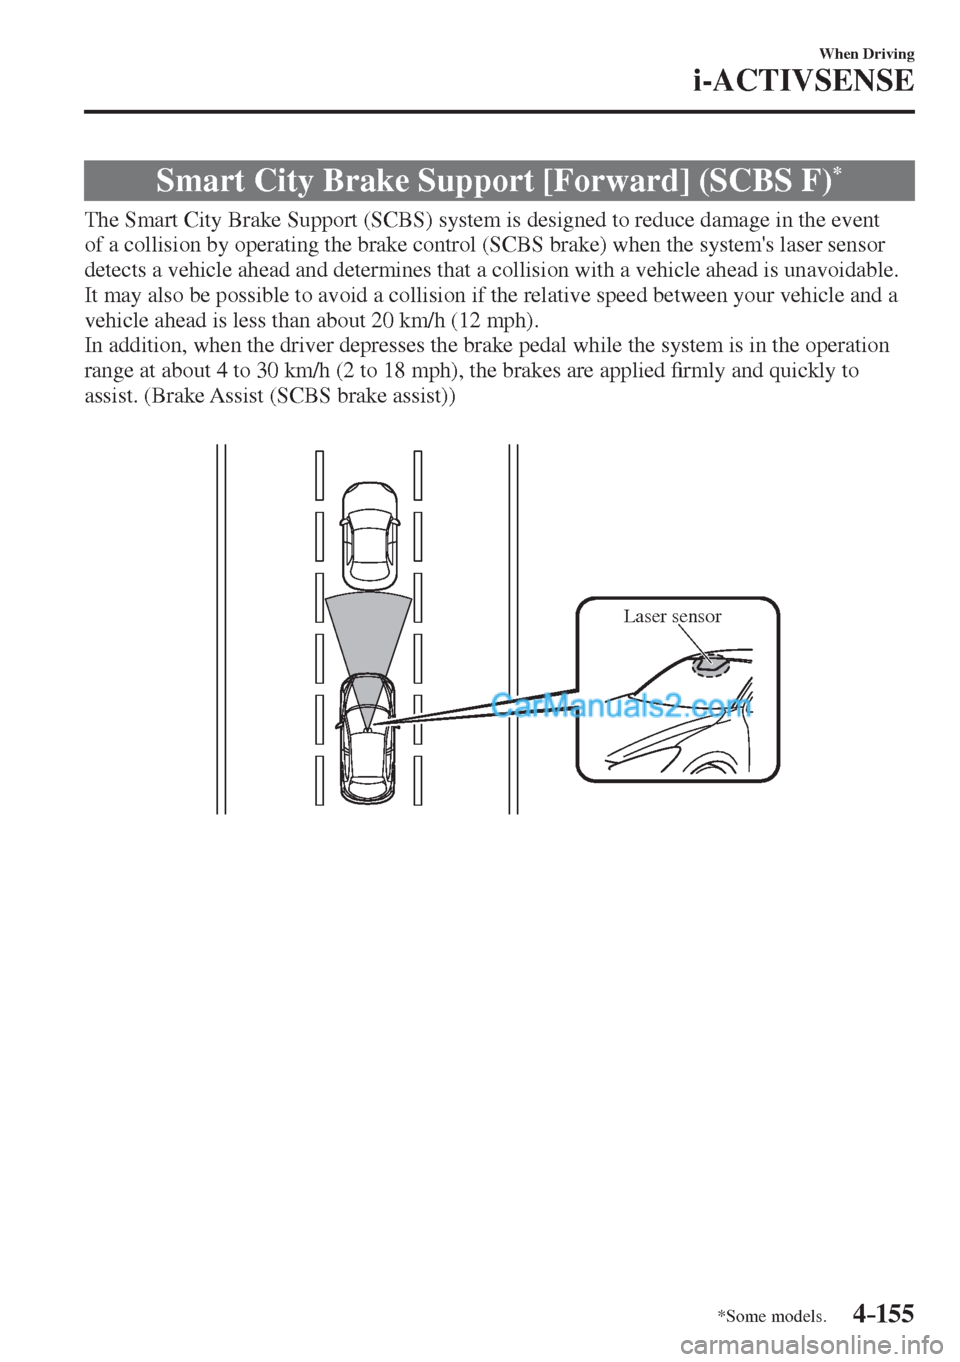 MAZDA MODEL 2 2017  Owners Manual (in English) 4–155
When Driving
i-ACTIVSENSE
*Some models.
 Smart City Brake Support [Forward] (SCBS F) * 
              The  Smart  City  Brake  Support  (SCBS)  system  is  designed  to  reduce  damage  in  th